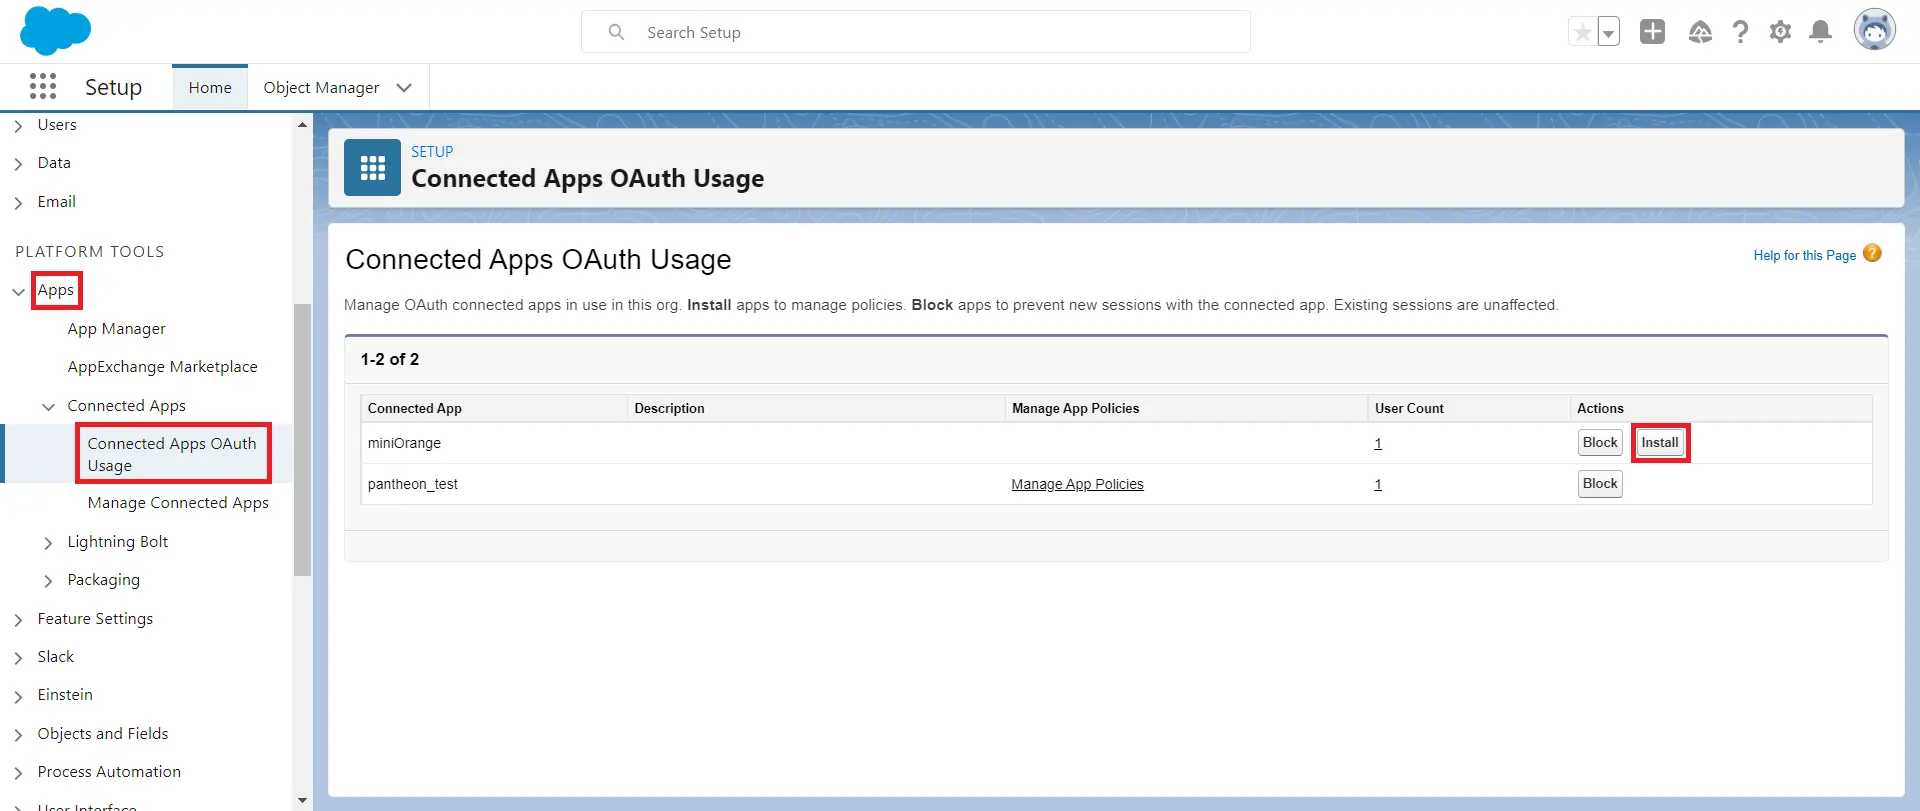 Configure Salesforce for Object sync - App